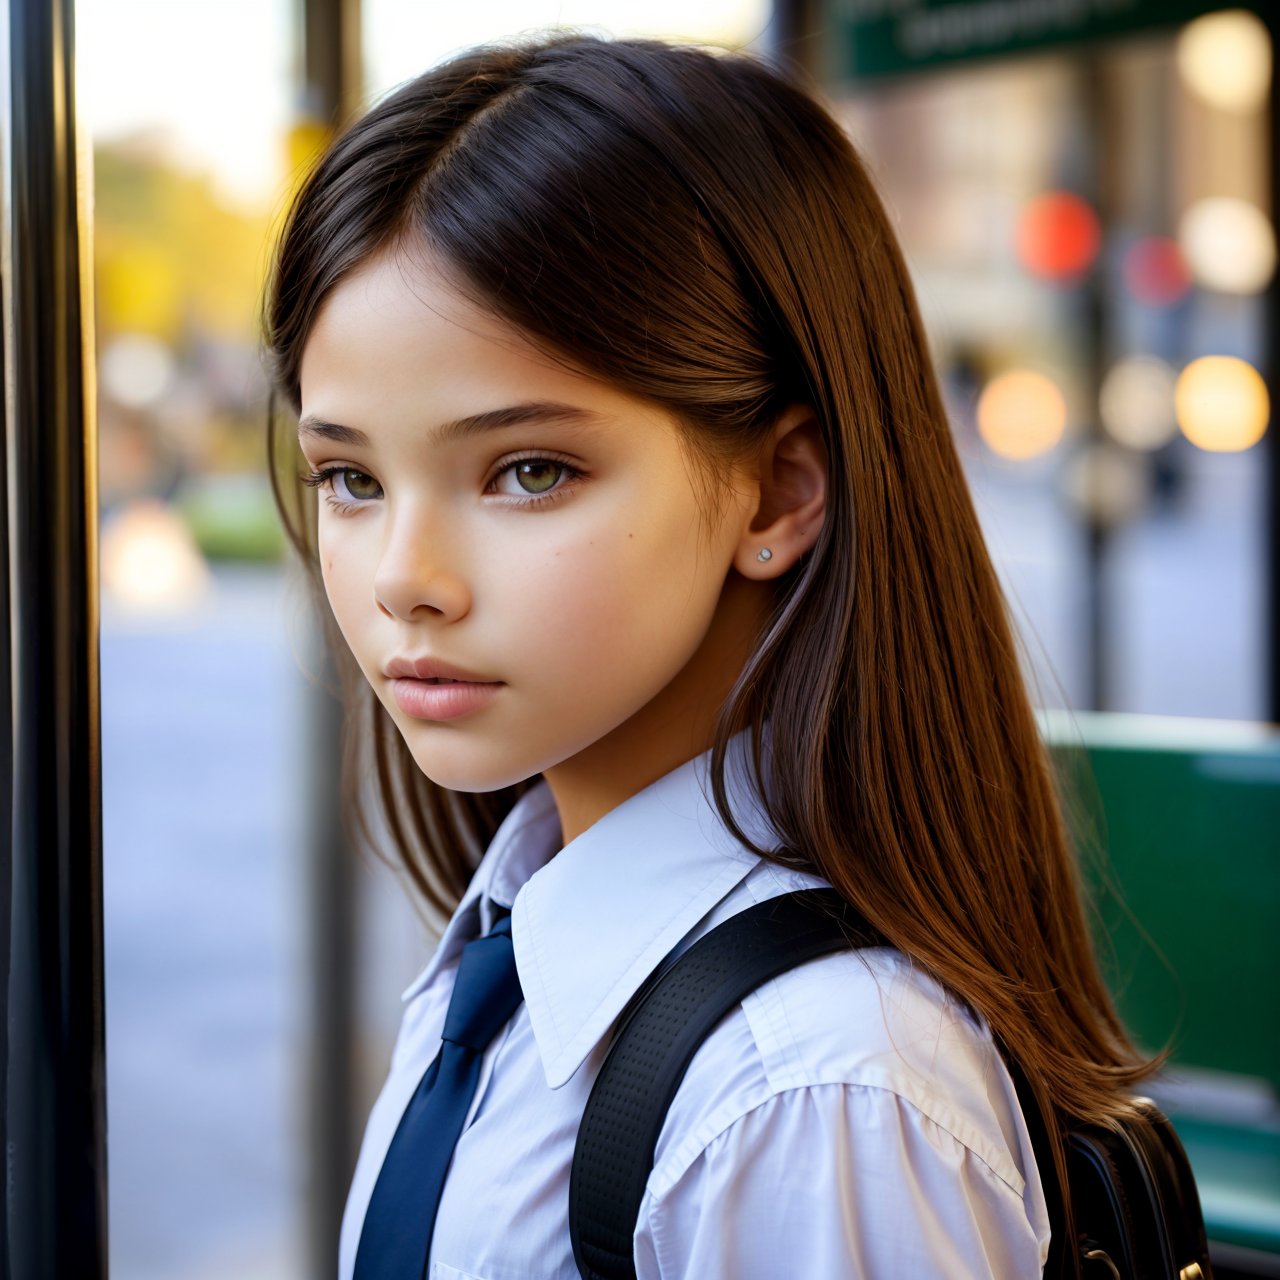 (masterpiece:1.3), HD quality, HD, HQ, 4K, looking at viewer, portrait of stunning (AIDA_LoRA_LG2014:1.1) <lora:AIDA_LoRA_LG2014:0.72> in a black school uniform waiting a bus on the bus stop, little girl, pretty face, intimate, cinematic, insane level of details, intricate pattern, studio photo, studio photo, kkw-ph1, hdr, f1.5, (colorful:1.1)